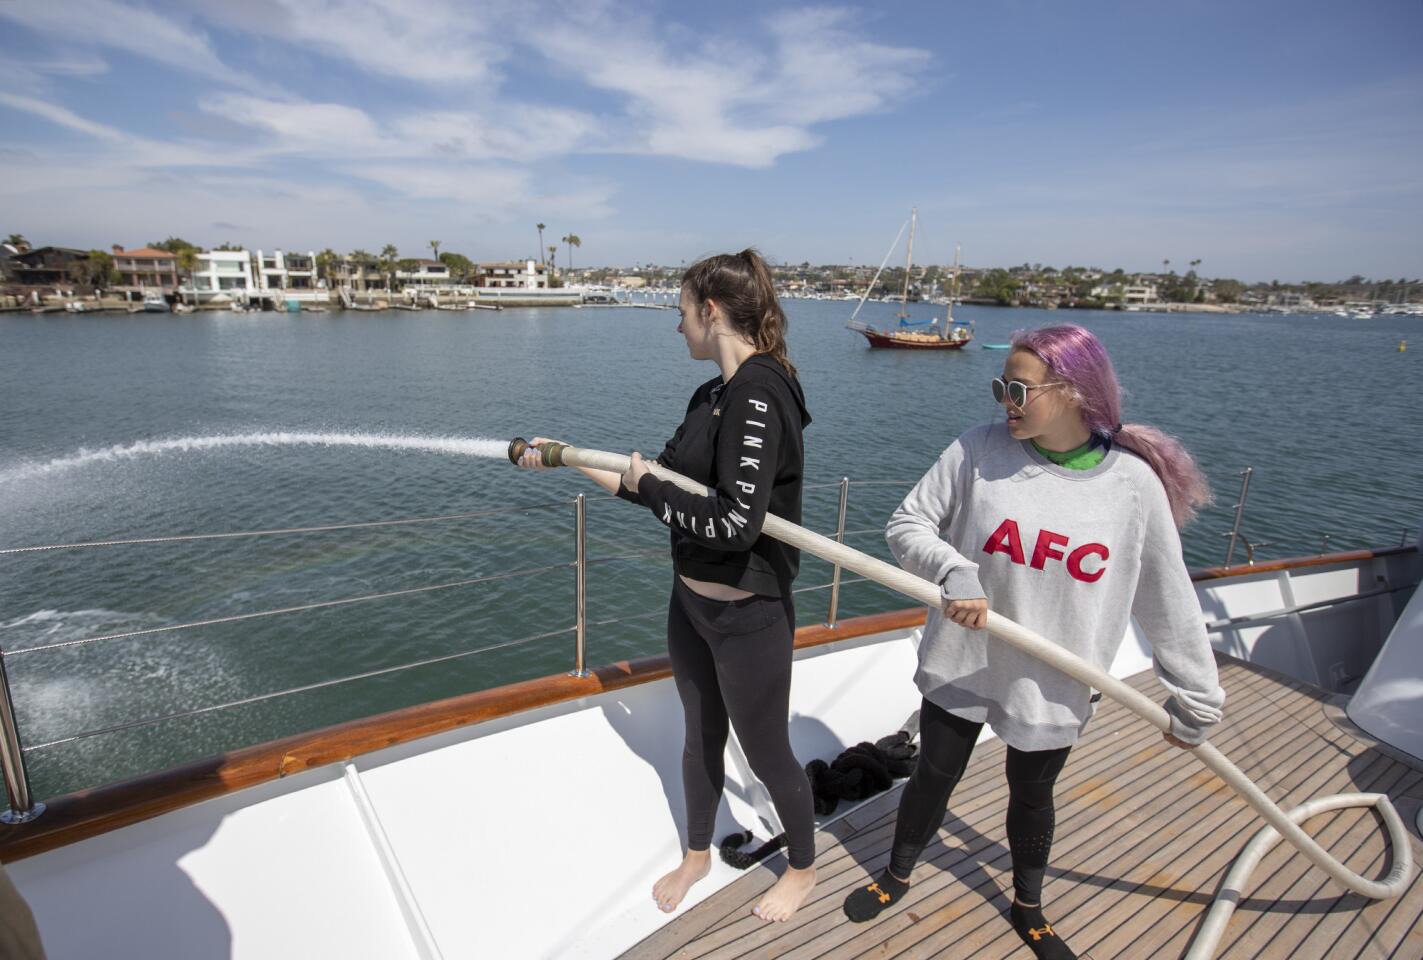 Daniella Daboub, 17, left, and Meredith McCuskey, 18, practice using the fire hose aboard Orange Coast College's Nordic Star on April 24.